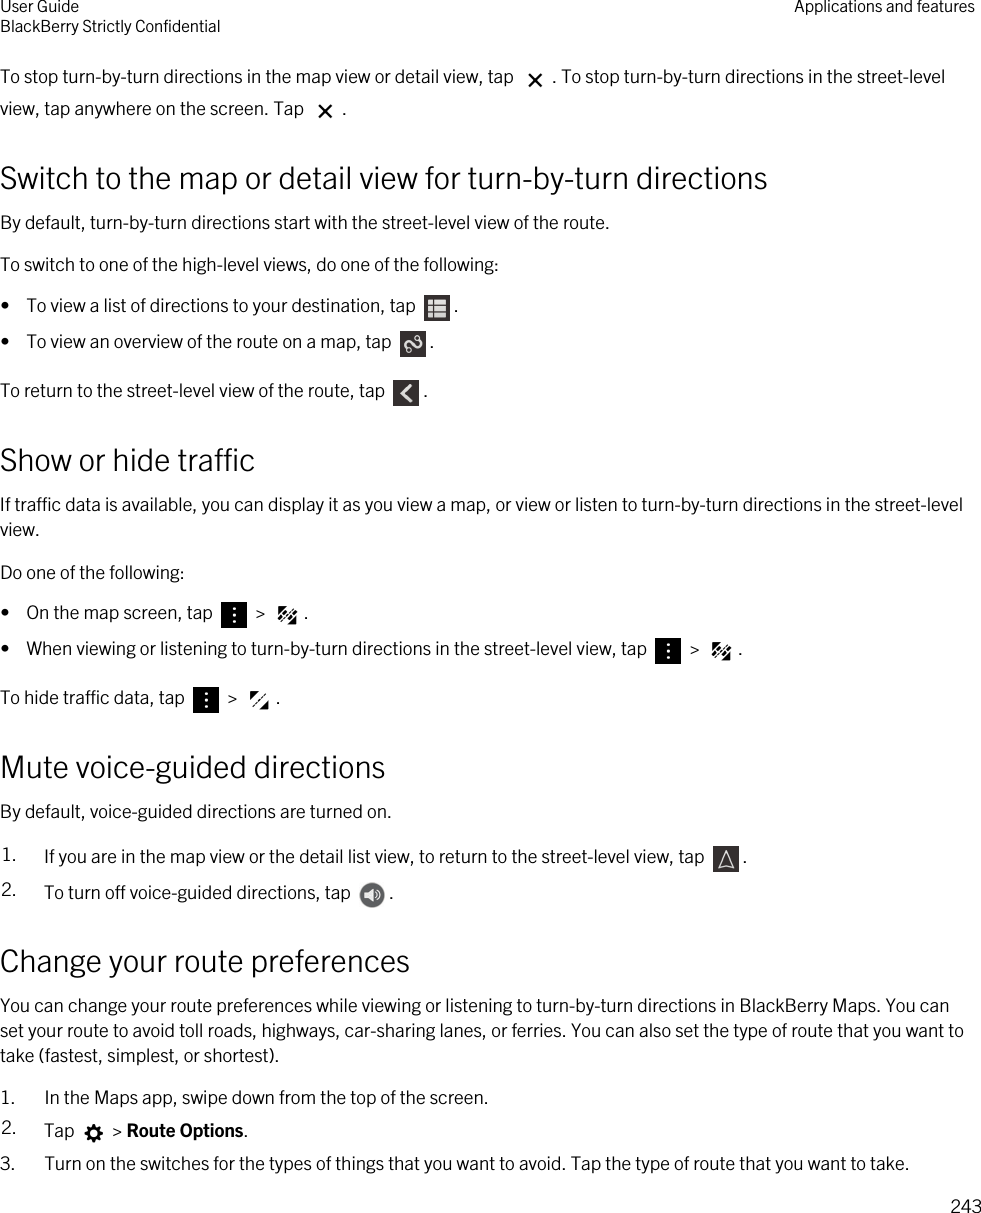 To stop turn-by-turn directions in the map view or detail view, tap  . To stop turn-by-turn directions in the street-level view, tap anywhere on the screen. Tap  .Switch to the map or detail view for turn-by-turn directionsBy default, turn-by-turn directions start with the street-level view of the route.To switch to one of the high-level views, do one of the following:•  To view a list of directions to your destination, tap  .•  To view an overview of the route on a map, tap  .To return to the street-level view of the route, tap  .Show or hide trafficIf traffic data is available, you can display it as you view a map, or view or listen to turn-by-turn directions in the street-level view.Do one of the following:•  On the map screen, tap   &gt;  .•  When viewing or listening to turn-by-turn directions in the street-level view, tap   &gt;  .To hide traffic data, tap   &gt;  .Mute voice-guided directionsBy default, voice-guided directions are turned on.1. If you are in the map view or the detail list view, to return to the street-level view, tap  .2. To turn off voice-guided directions, tap  .Change your route preferencesYou can change your route preferences while viewing or listening to turn-by-turn directions in BlackBerry Maps. You can set your route to avoid toll roads, highways, car-sharing lanes, or ferries. You can also set the type of route that you want to take (fastest, simplest, or shortest).1. In the Maps app, swipe down from the top of the screen.2. Tap   &gt; Route Options.3. Turn on the switches for the types of things that you want to avoid. Tap the type of route that you want to take.User GuideBlackBerry Strictly Confidential Applications and features243